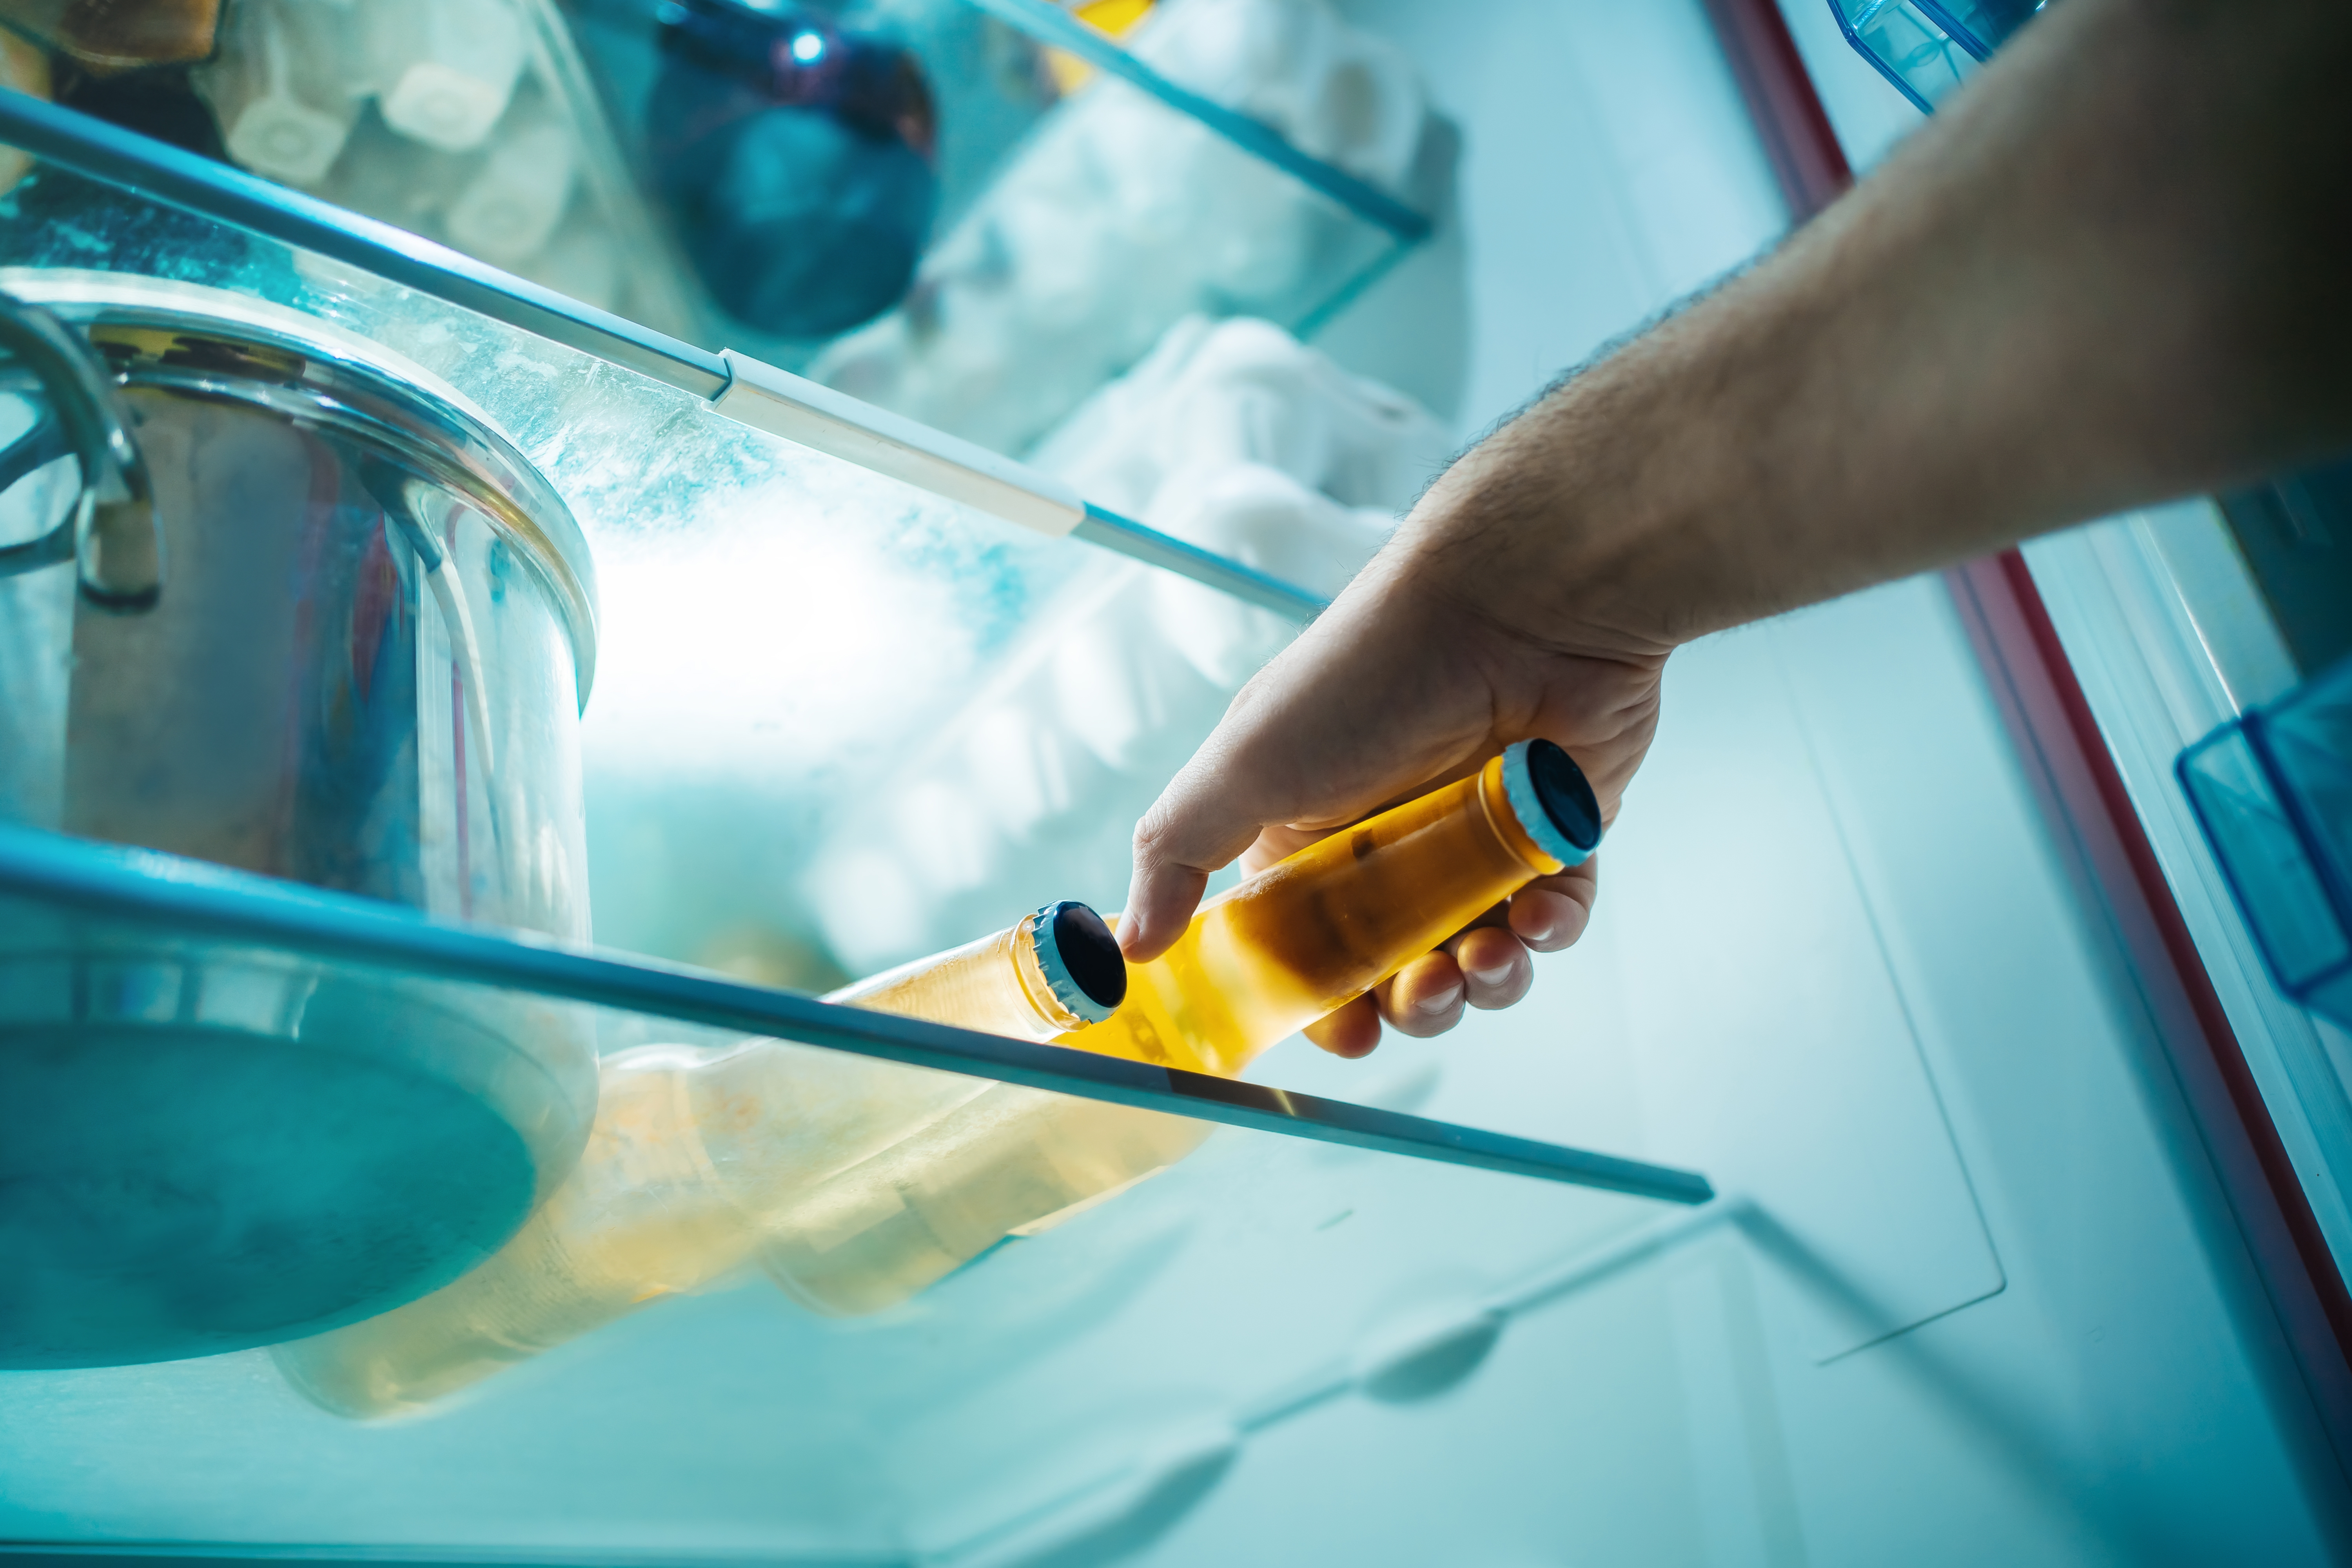 Two bottles of cold light beer in the refrigerator. | Source: Shutterstock